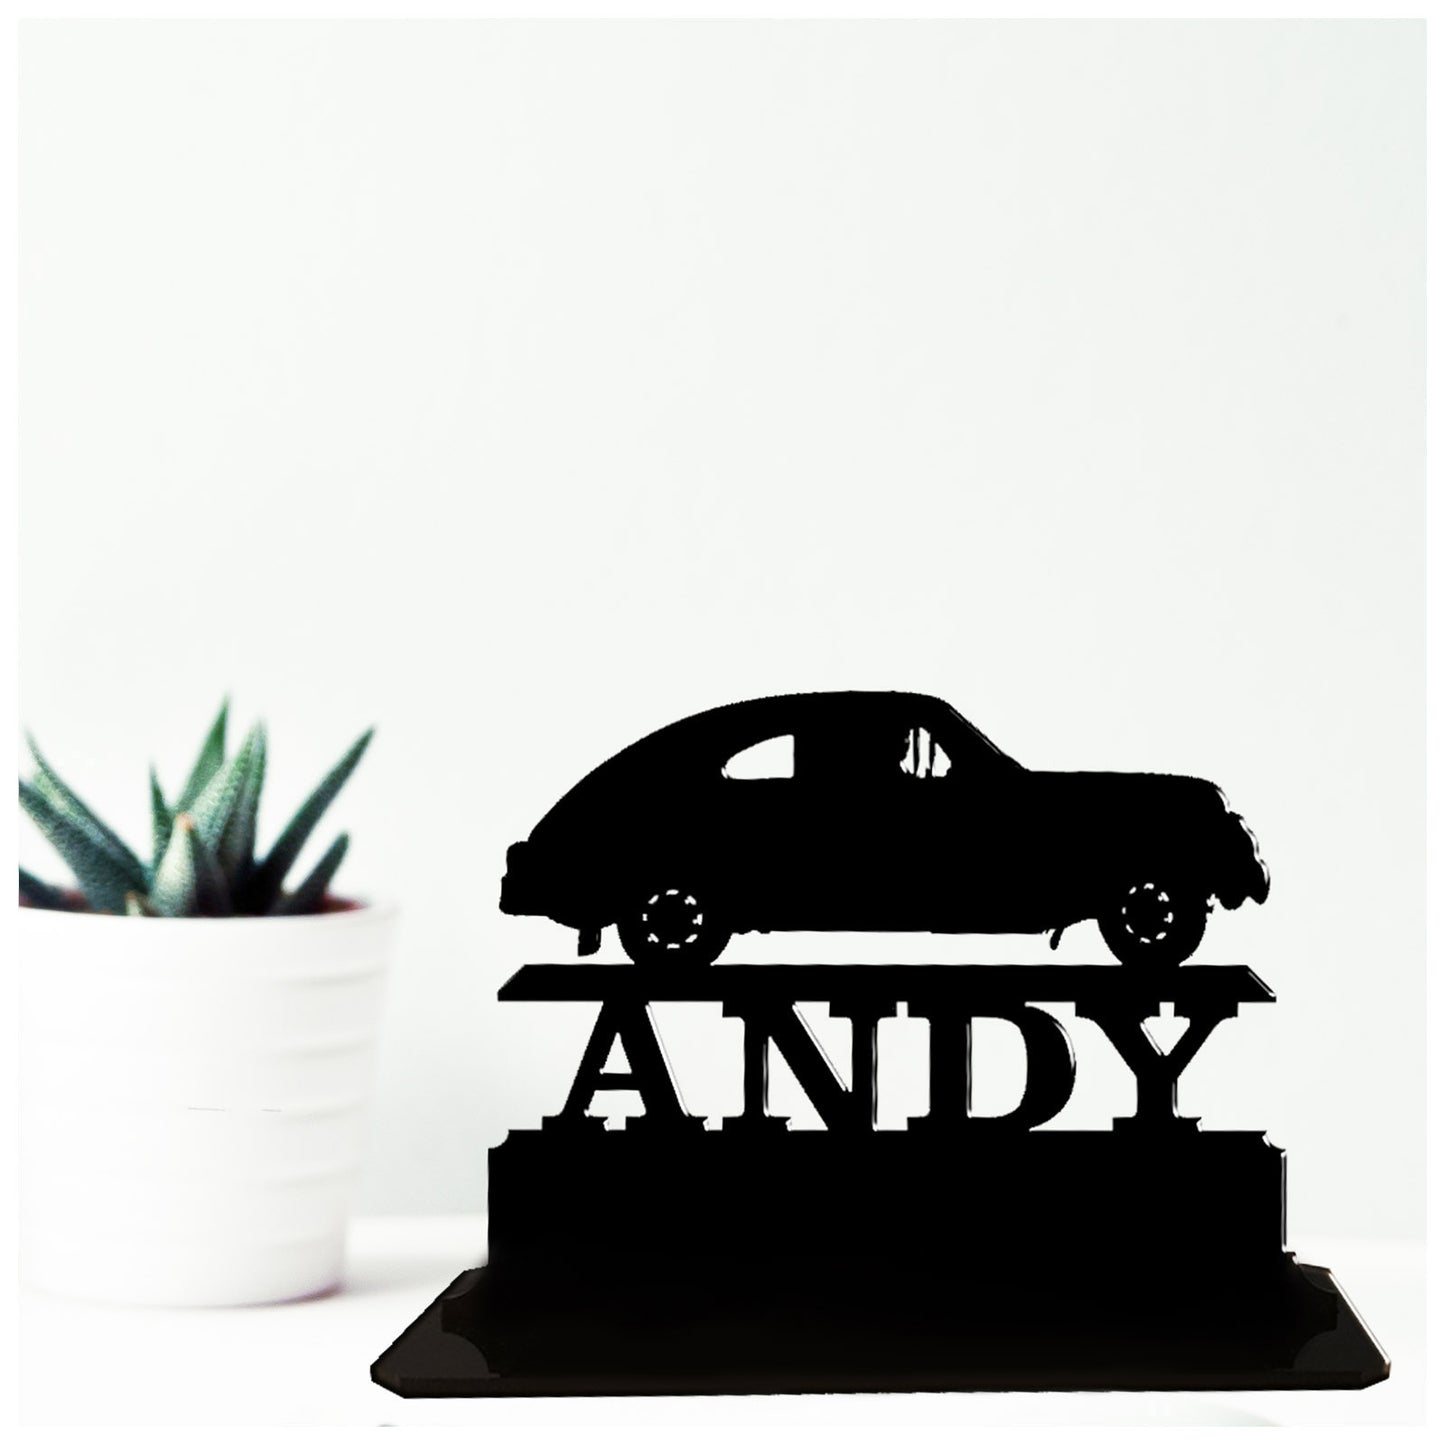 Acrylic personalised 40s classic car gift idea for collectors and enthusiasts. Standalone keepsake ornaments.